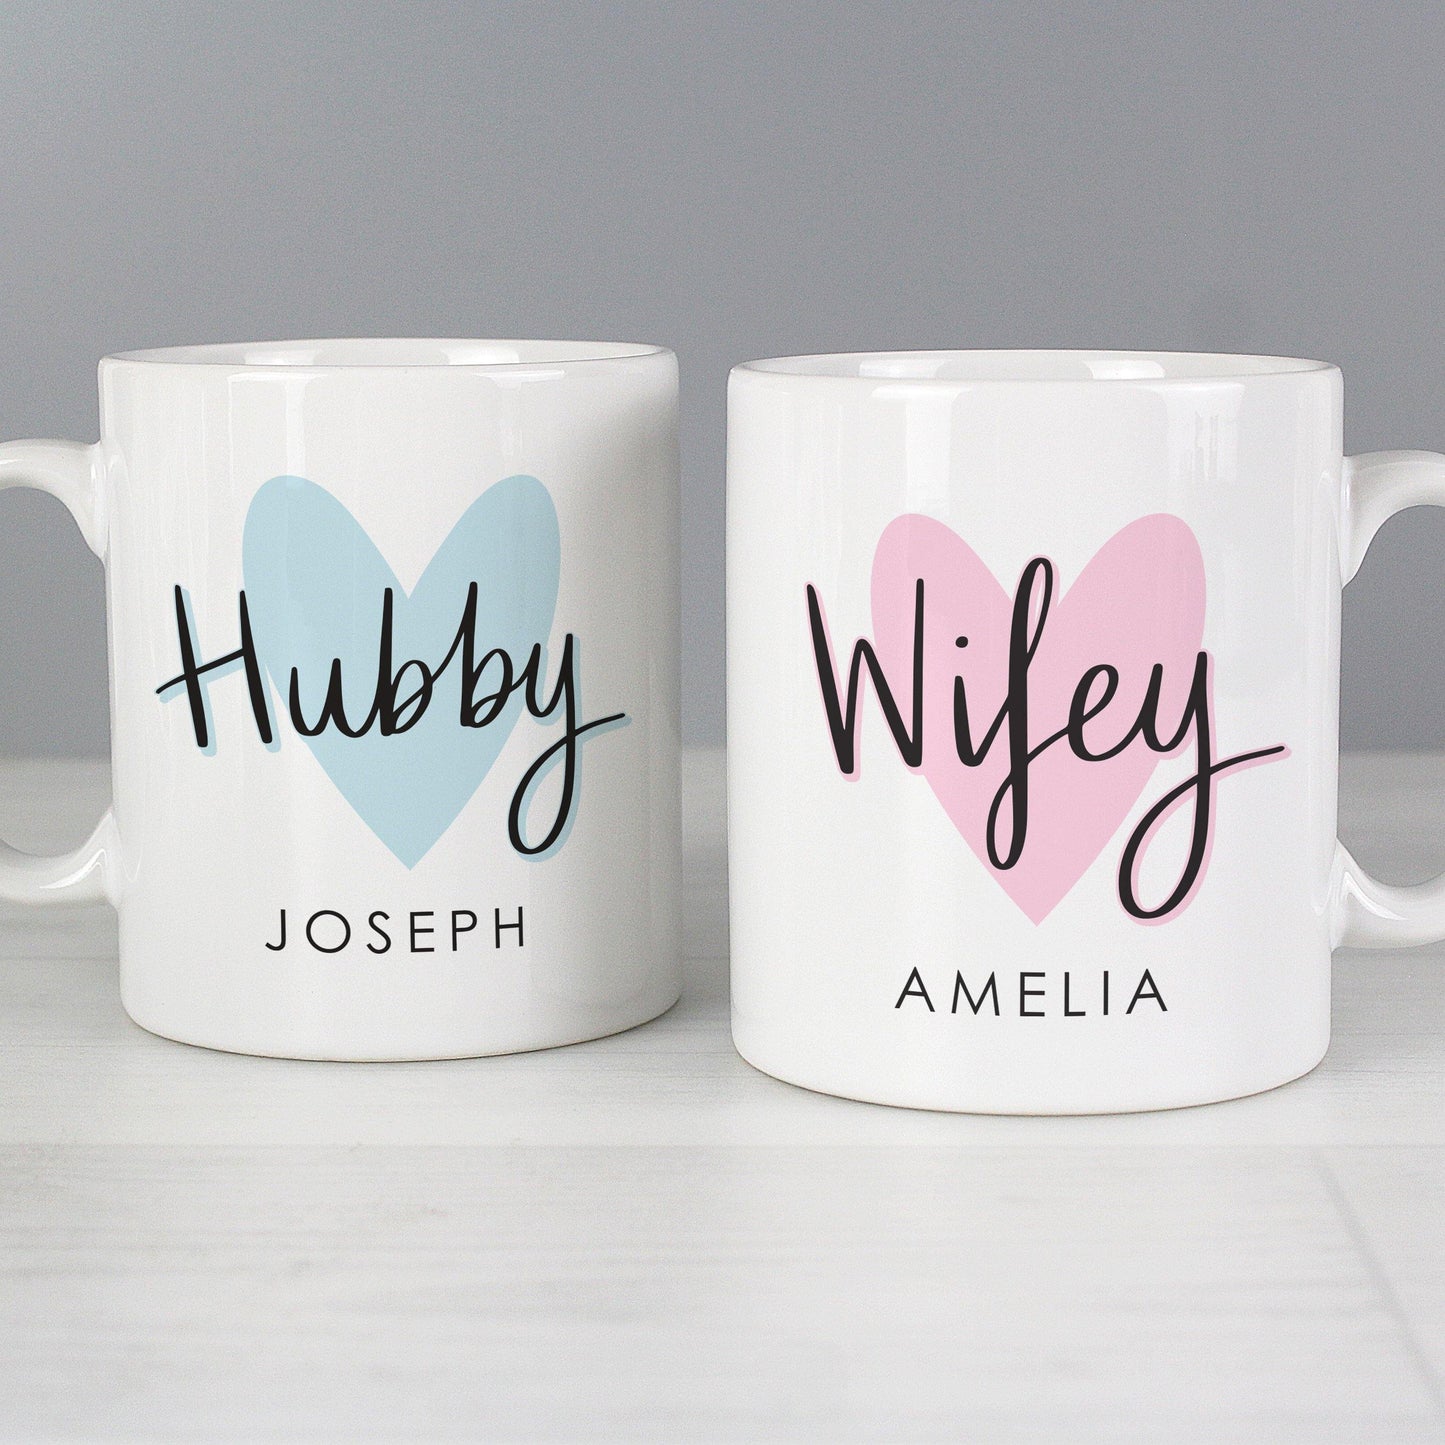 Personalised Heart Hubby & Wifey Message Mug Set Couple Gift - Home Inspired Gifts